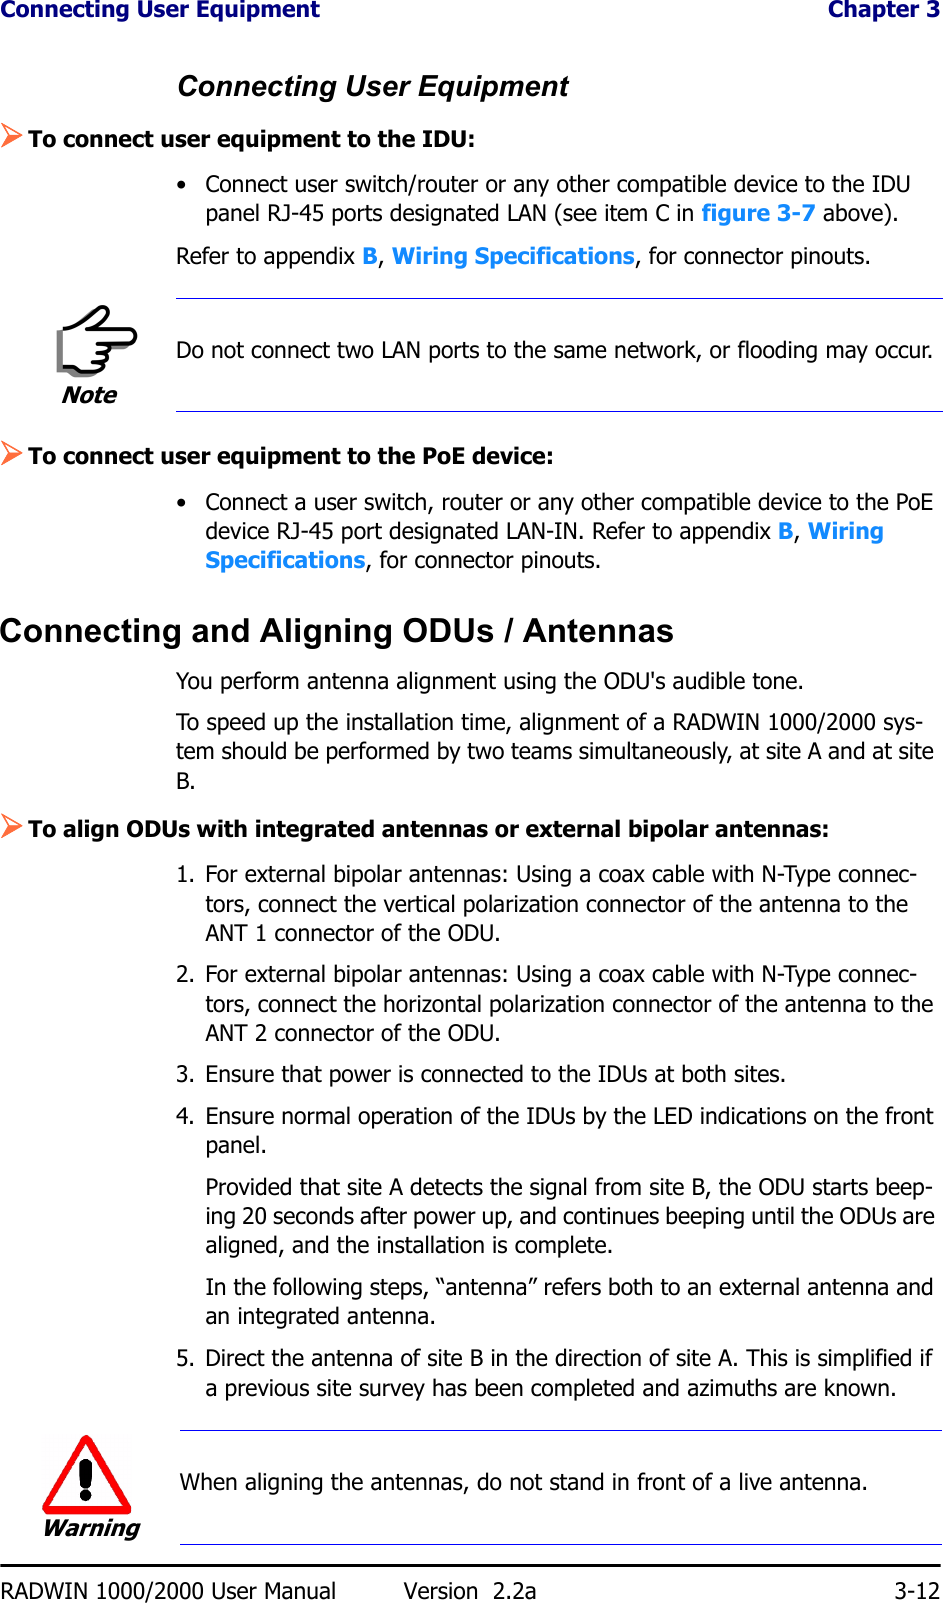 Connecting User Equipment  Chapter 3RADWIN 1000/2000 User Manual Version  2.2a 3-12Connecting User Equipment¾To connect user equipment to the IDU:• Connect user switch/router or any other compatible device to the IDU panel RJ-45 ports designated LAN (see item C in figure 3-7 above).Refer to appendix B, Wiring Specifications, for connector pinouts.¾To connect user equipment to the PoE device:• Connect a user switch, router or any other compatible device to the PoE device RJ-45 port designated LAN-IN. Refer to appendix B, Wiring Specifications, for connector pinouts.Connecting and Aligning ODUs / AntennasYou perform antenna alignment using the ODU&apos;s audible tone.To speed up the installation time, alignment of a RADWIN 1000/2000 sys-tem should be performed by two teams simultaneously, at site A and at site B.¾To align ODUs with integrated antennas or external bipolar antennas:1. For external bipolar antennas: Using a coax cable with N-Type connec-tors, connect the vertical polarization connector of the antenna to the ANT 1 connector of the ODU.2. For external bipolar antennas: Using a coax cable with N-Type connec-tors, connect the horizontal polarization connector of the antenna to the ANT 2 connector of the ODU.3. Ensure that power is connected to the IDUs at both sites.4. Ensure normal operation of the IDUs by the LED indications on the front panel.Provided that site A detects the signal from site B, the ODU starts beep-ing 20 seconds after power up, and continues beeping until the ODUs are aligned, and the installation is complete.In the following steps, “antenna” refers both to an external antenna and an integrated antenna.5. Direct the antenna of site B in the direction of site A. This is simplified if a previous site survey has been completed and azimuths are known.NoteDo not connect two LAN ports to the same network, or flooding may occur.WarningWhen aligning the antennas, do not stand in front of a live antenna.